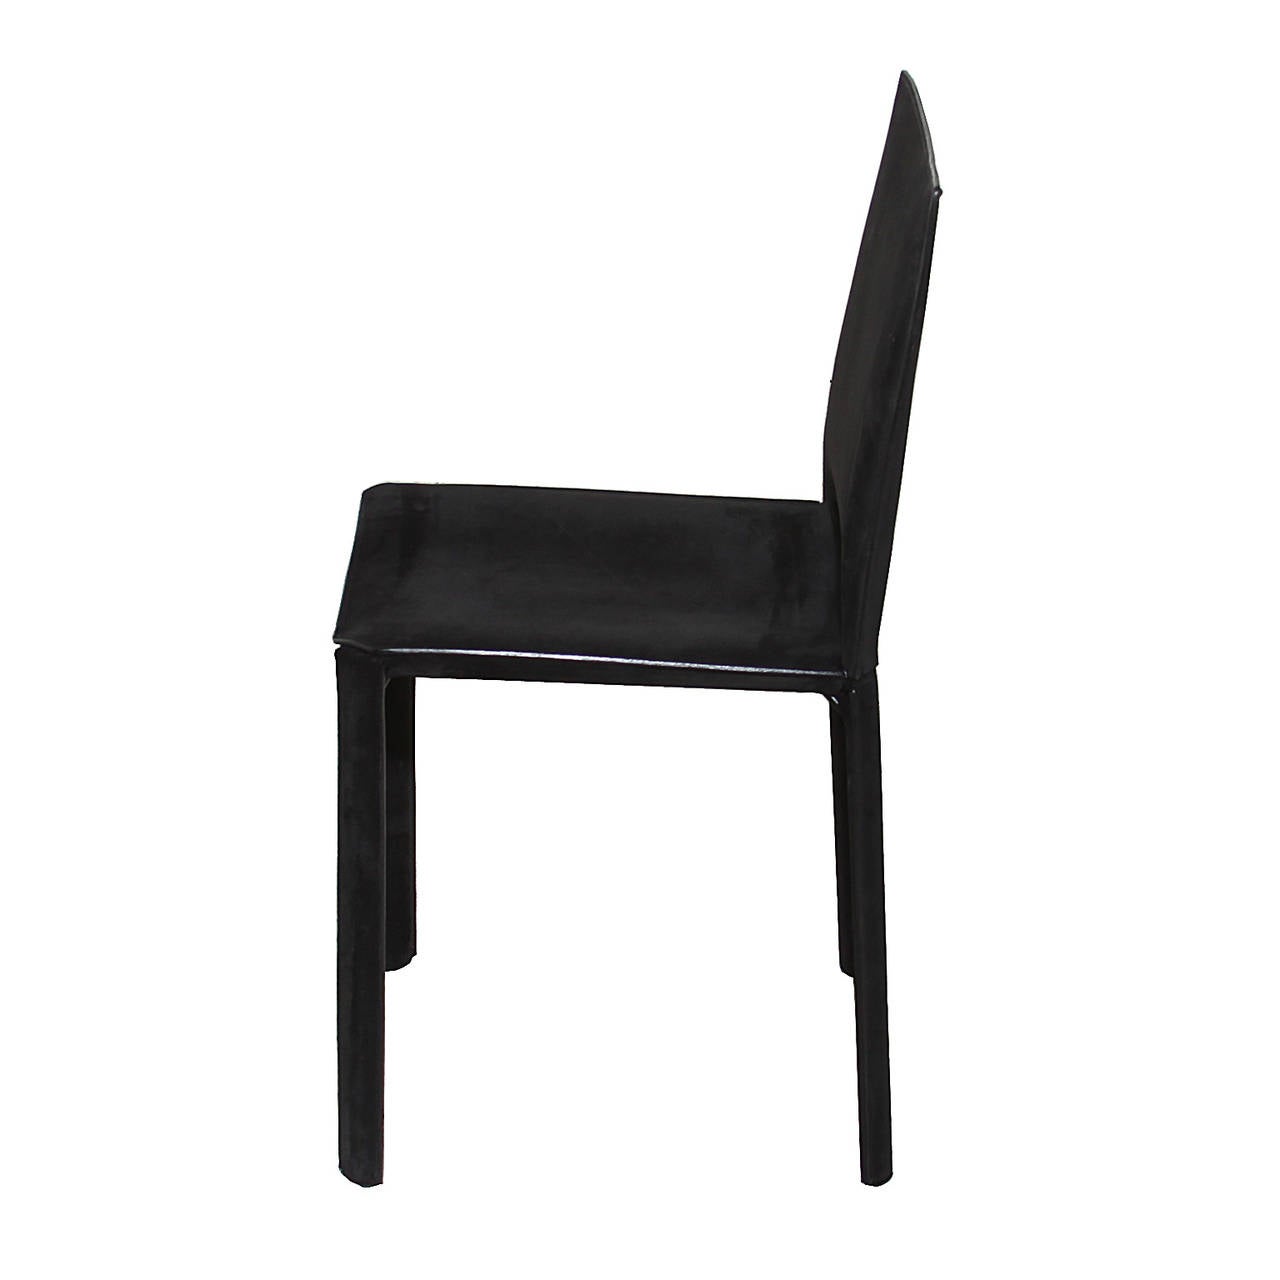 Mid-20th Century Modern De Couro of Brazil Chairs in Black Leather For Sale